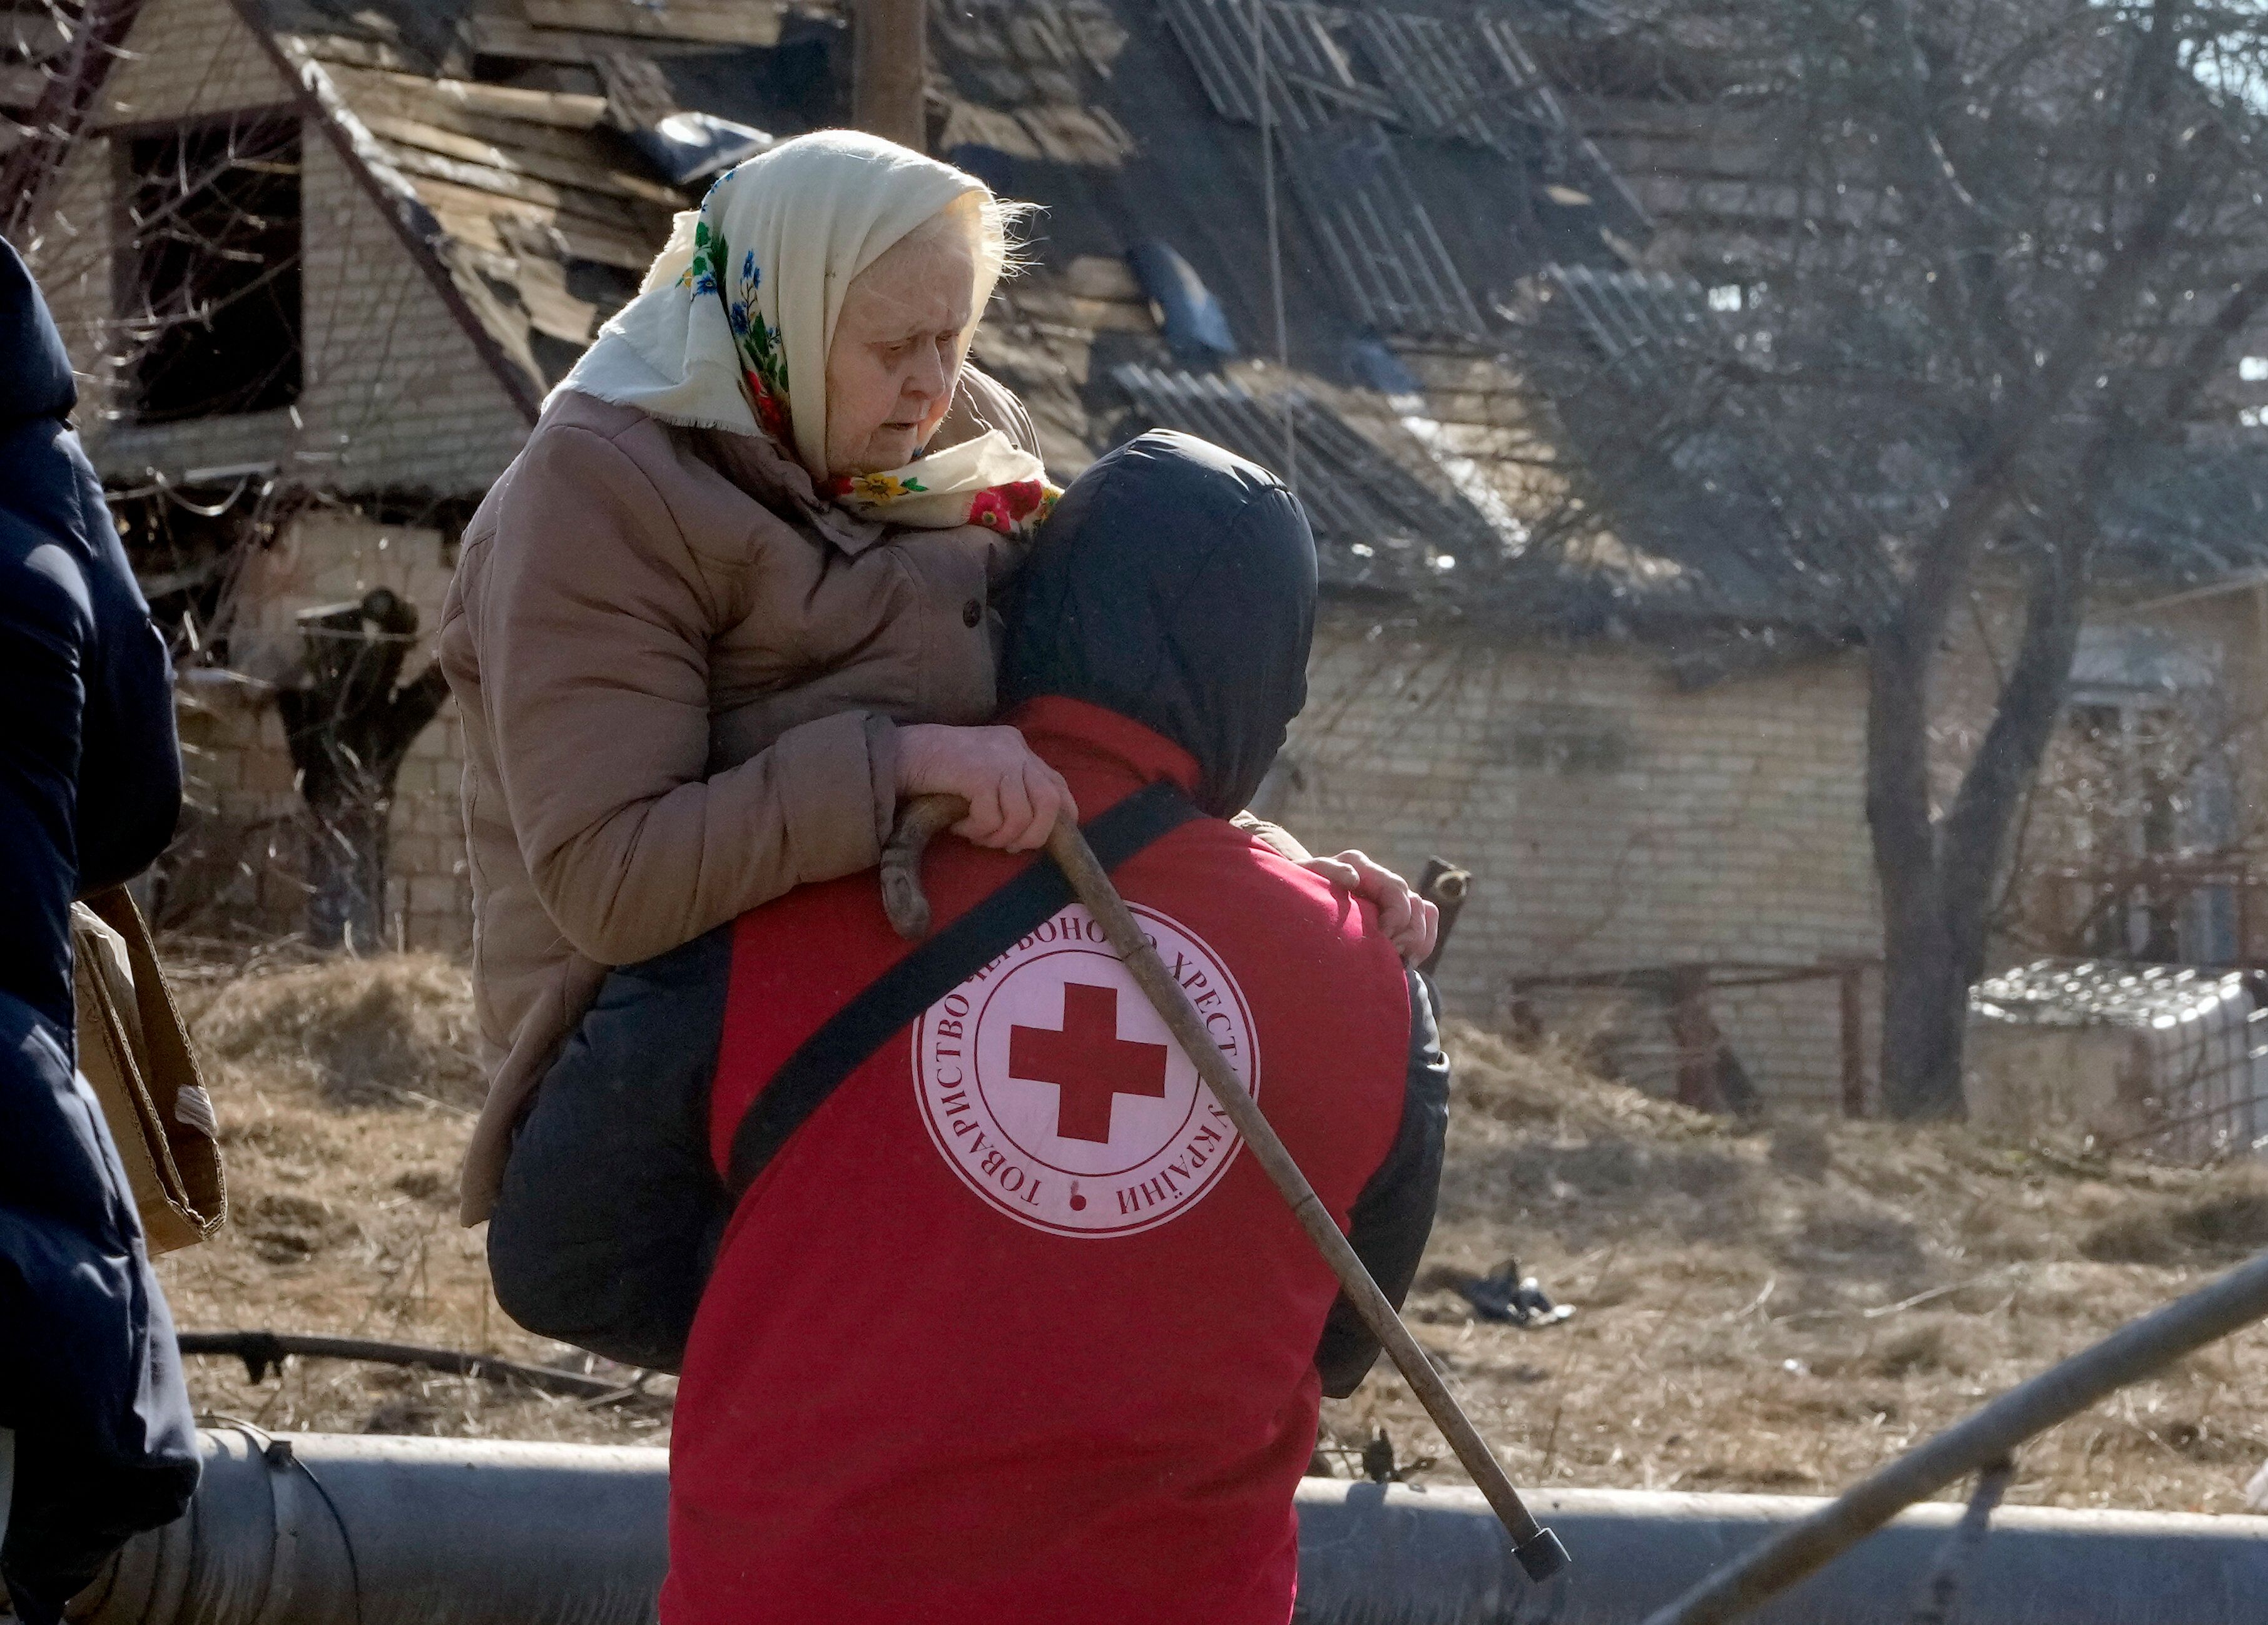 A Red Cross worker carries a woman during an evacuation in Irpin.